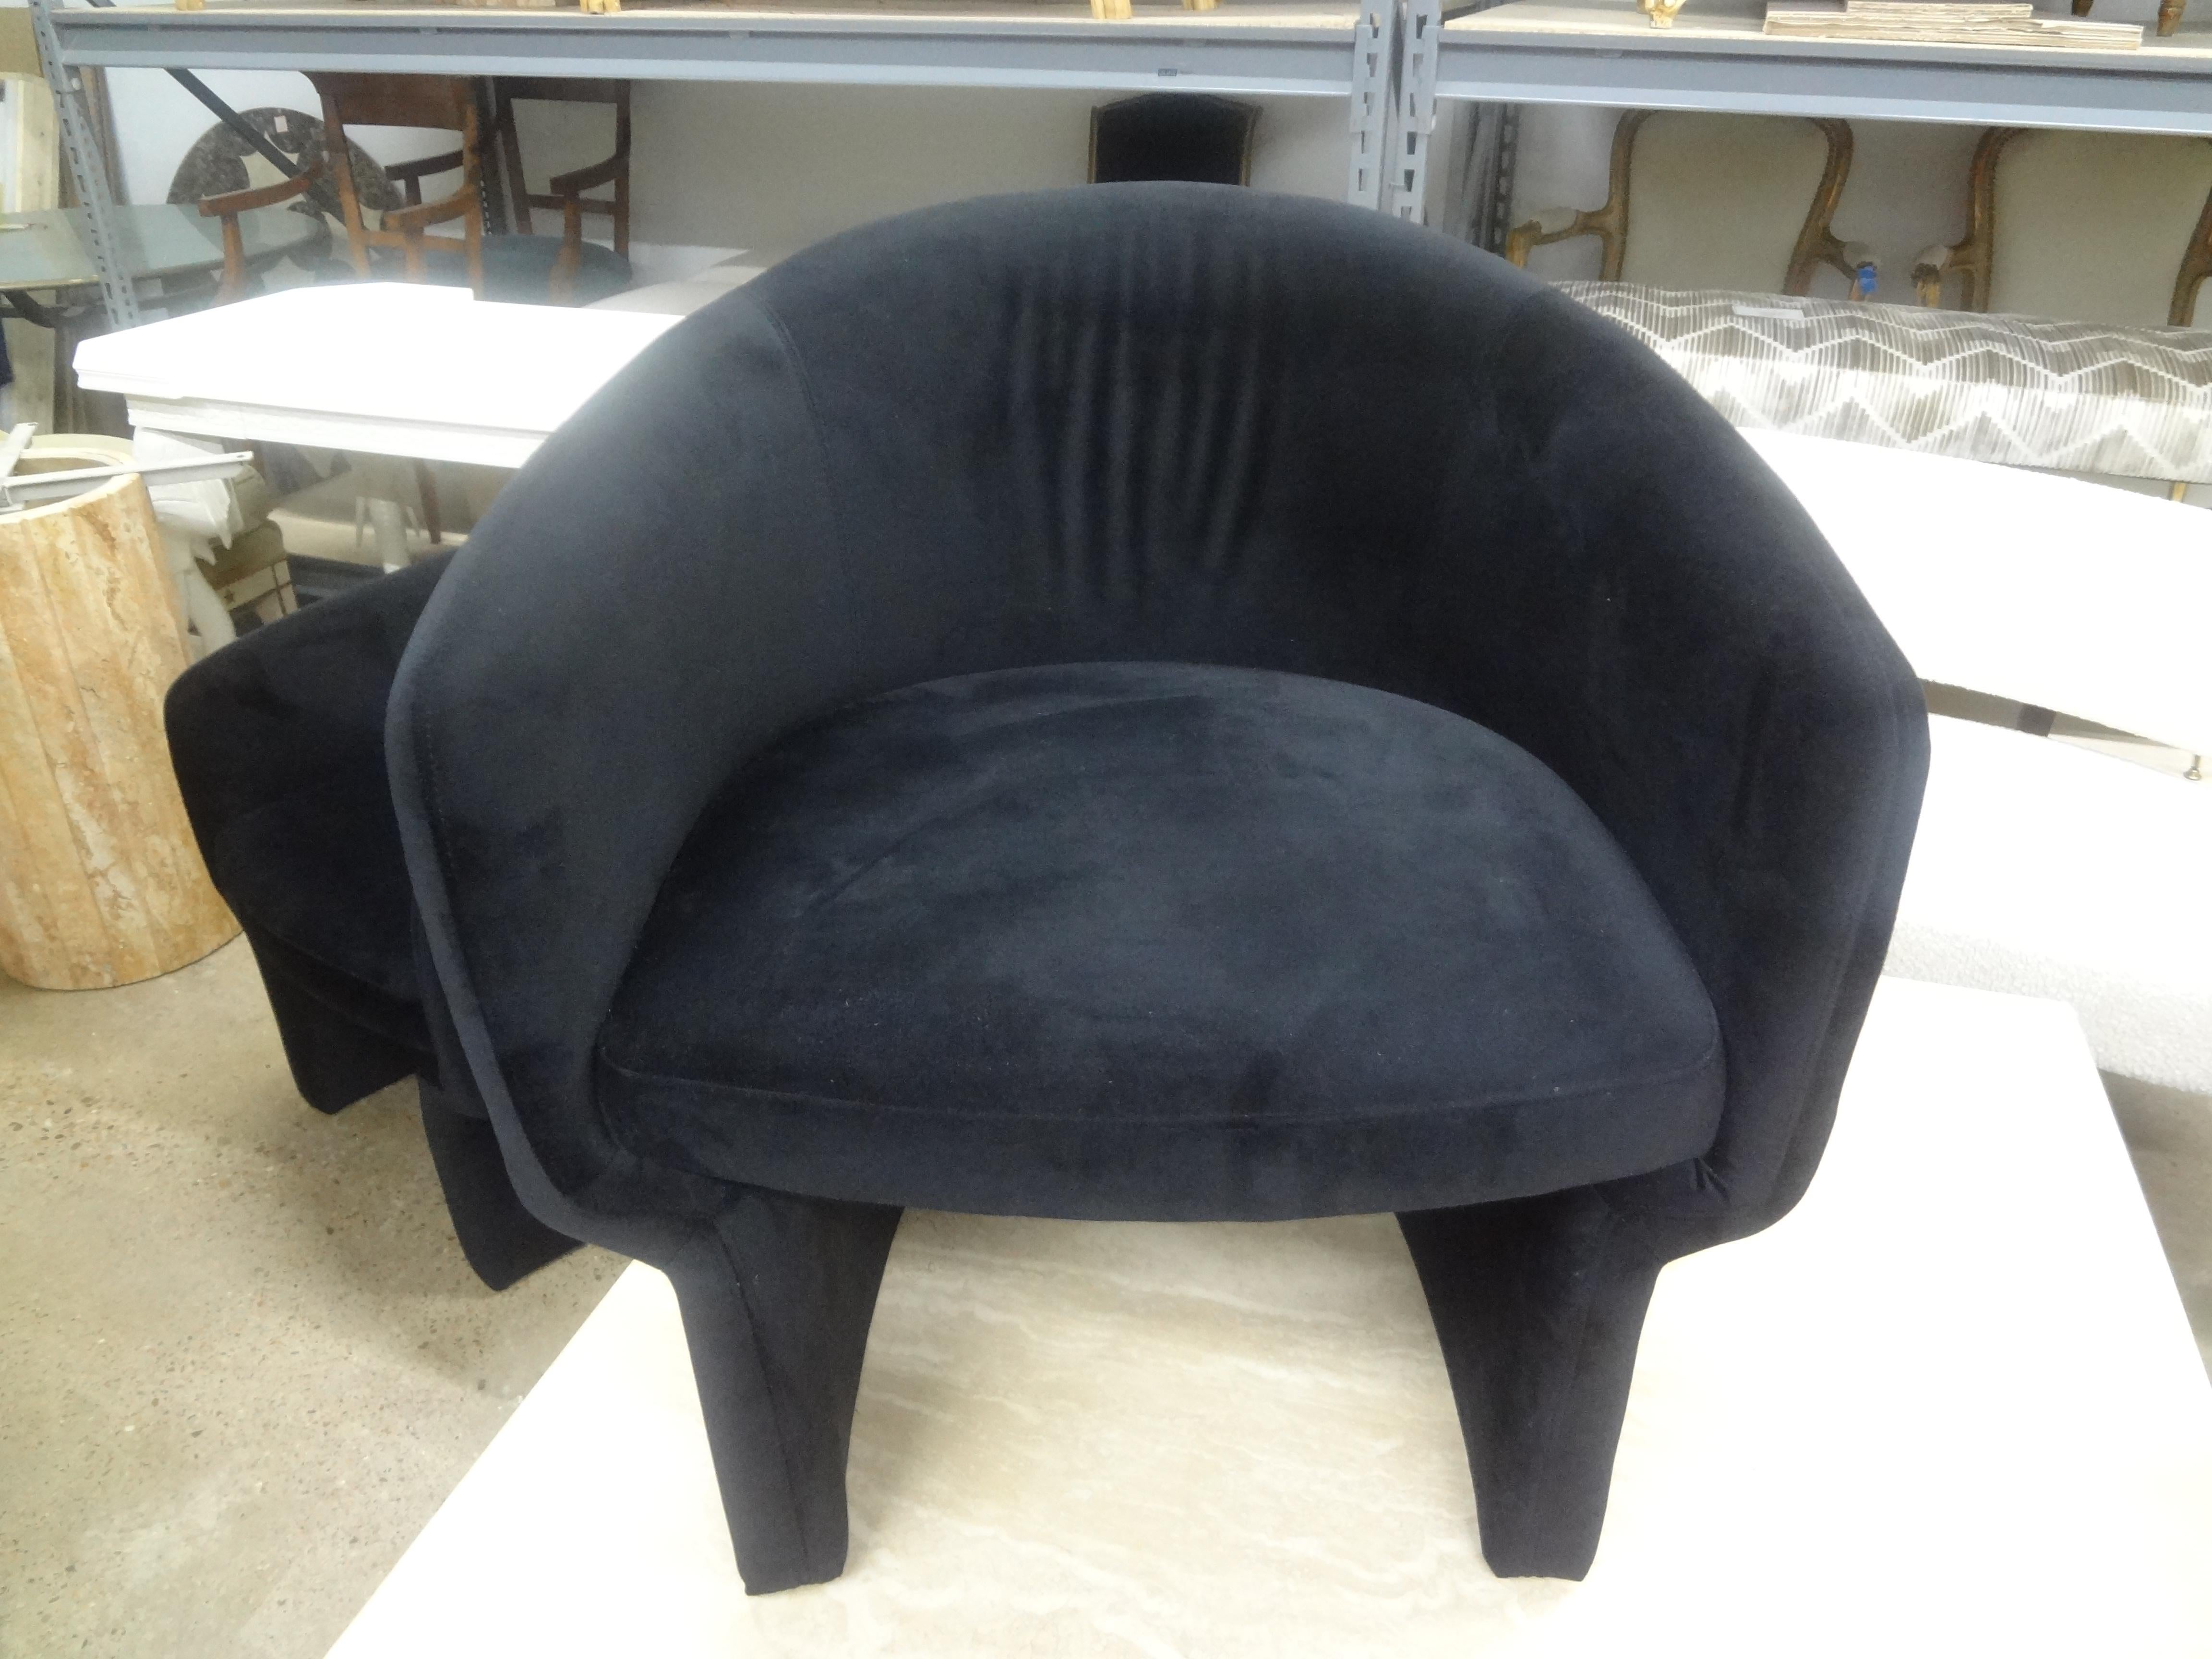 Pair Of Milo Baughman Inspired Postmodern Lounge Chairs On Plinths In Good Condition For Sale In Houston, TX